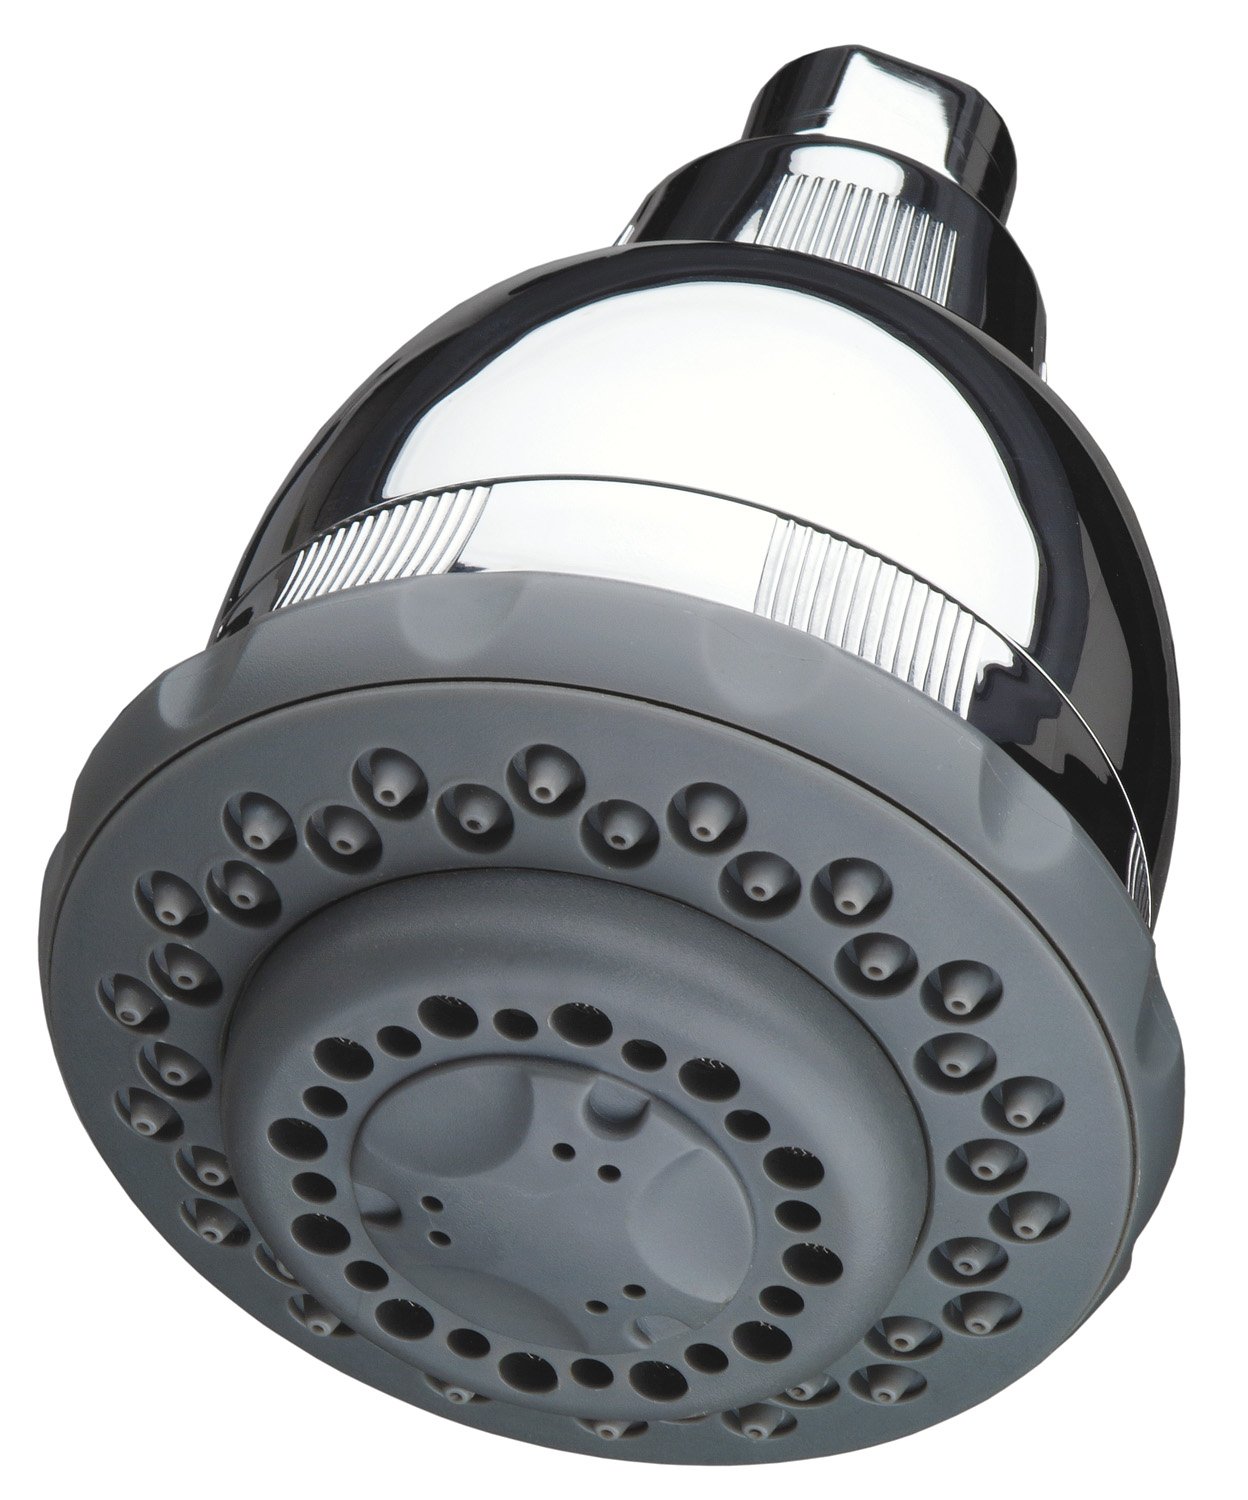 Culligan WSH-C125 Wall-Mounted Filtered Showerhead with Massage, 10,000 Gallon, Chrome, 8.5